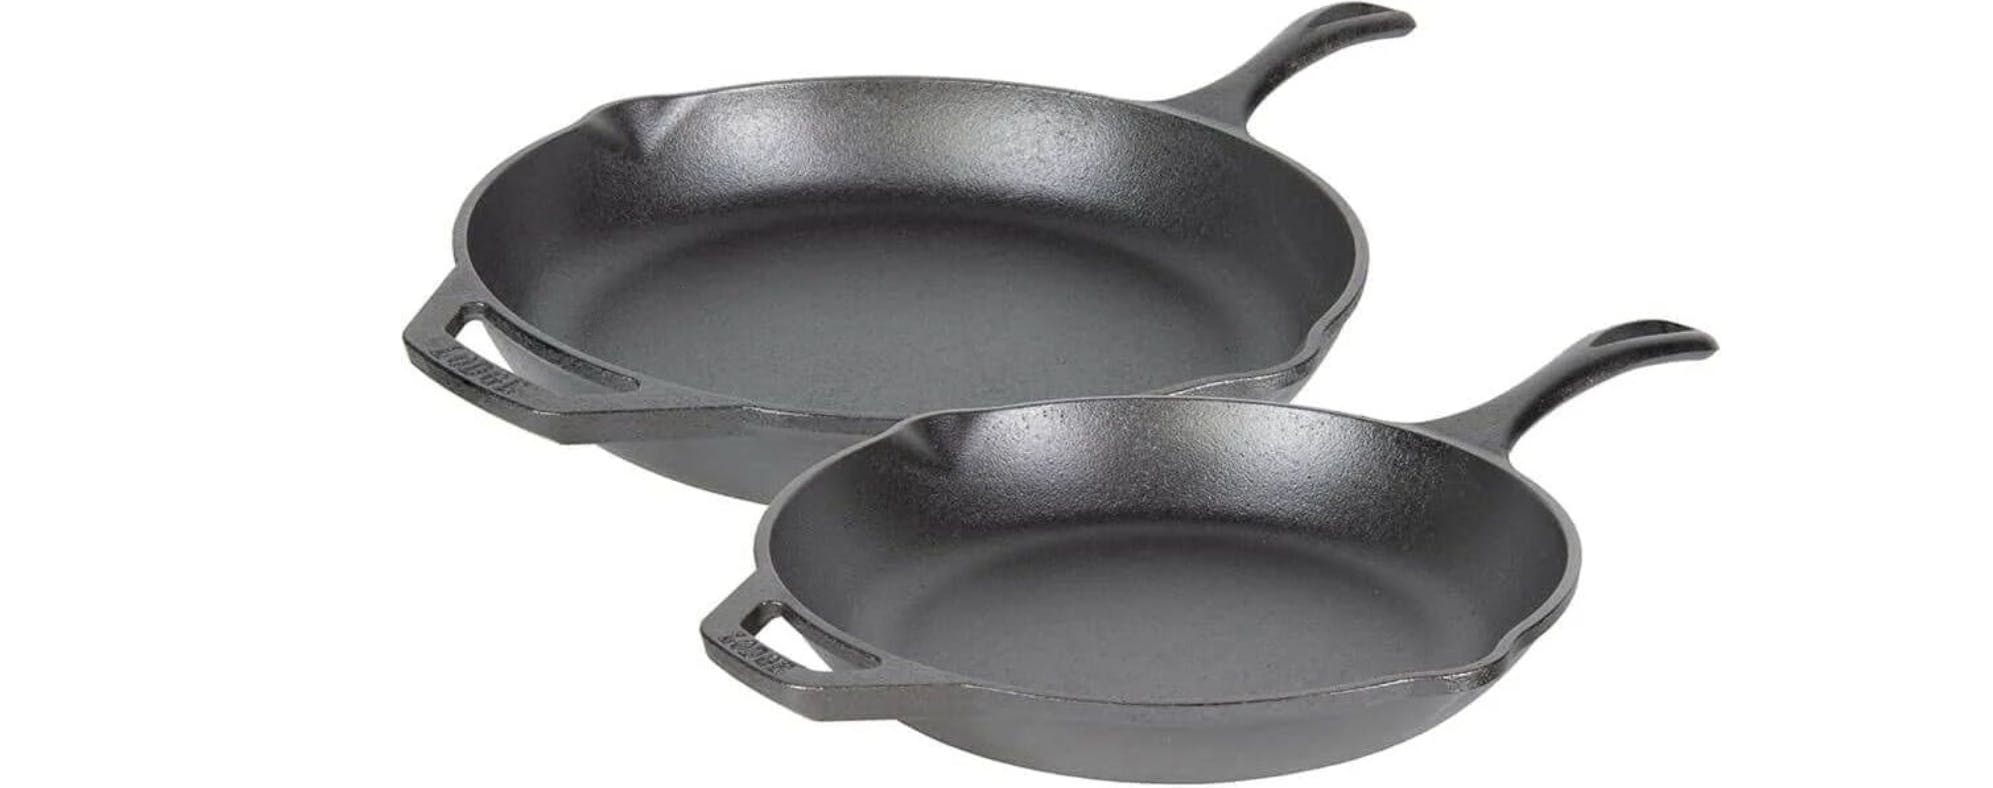 Lodge Cast Iron 6-Piece Bakeware Set with Jelly Roll Size Baking Pan